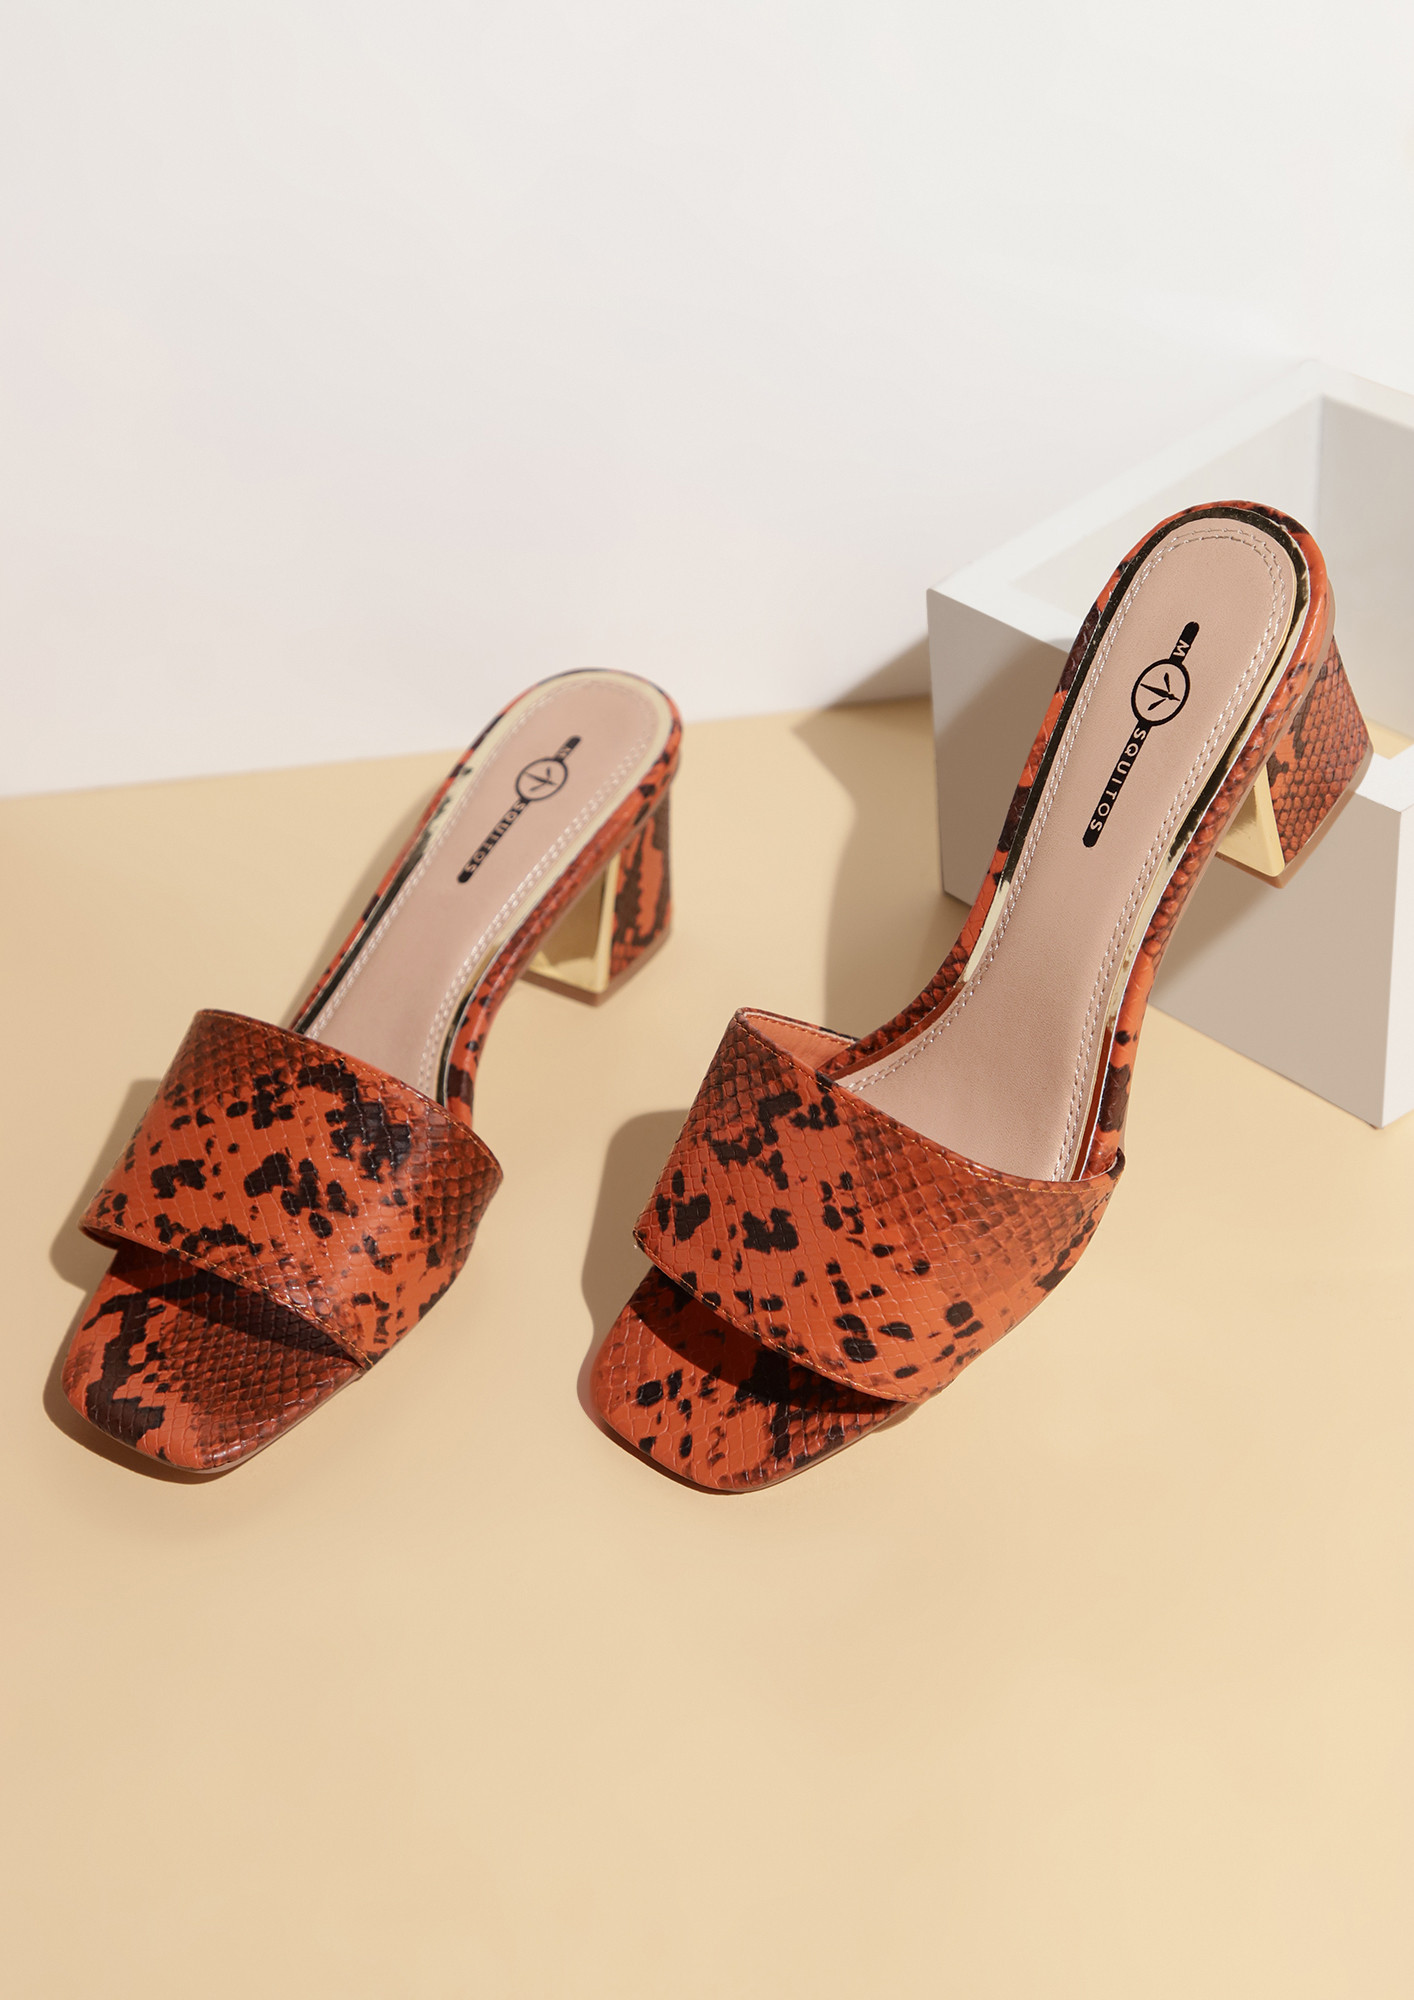 PRINTED STYLE SNAKE PRINT SANDALS